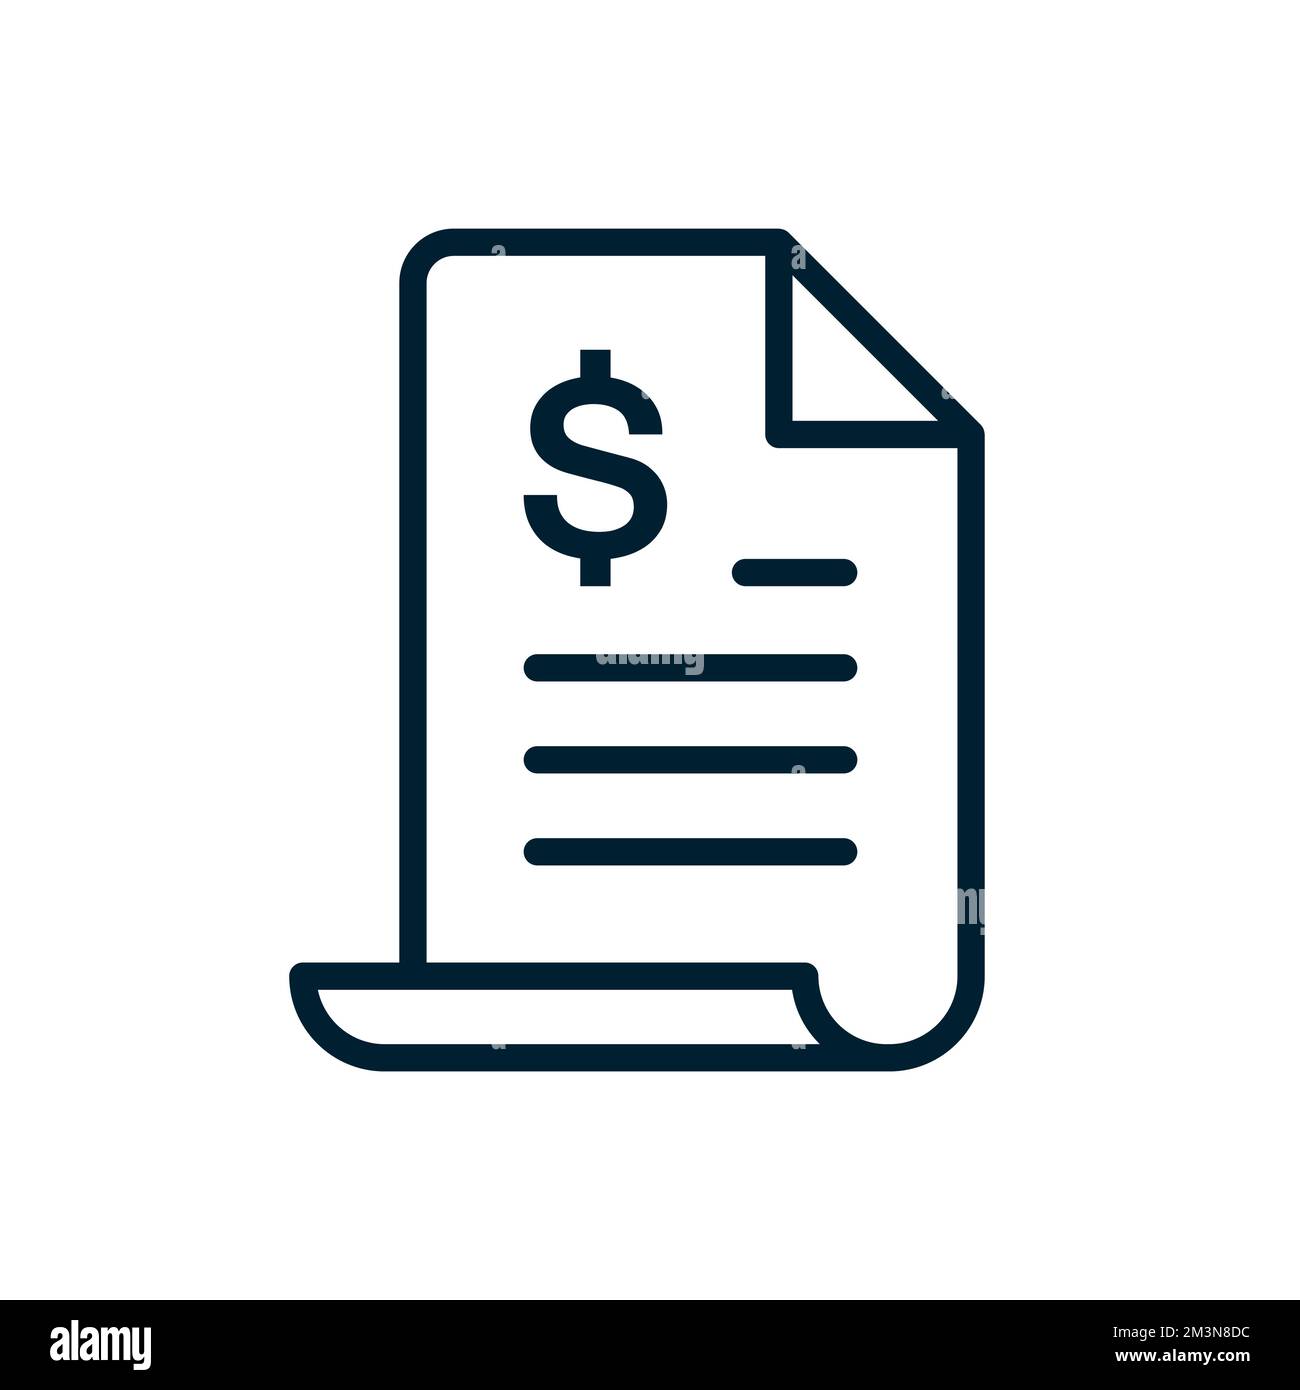 Invoice line icon. Payment and bill invoice. Order symbol concept. Tax sign design. Paper bank document icon. Vector invoice icon Stock Vector